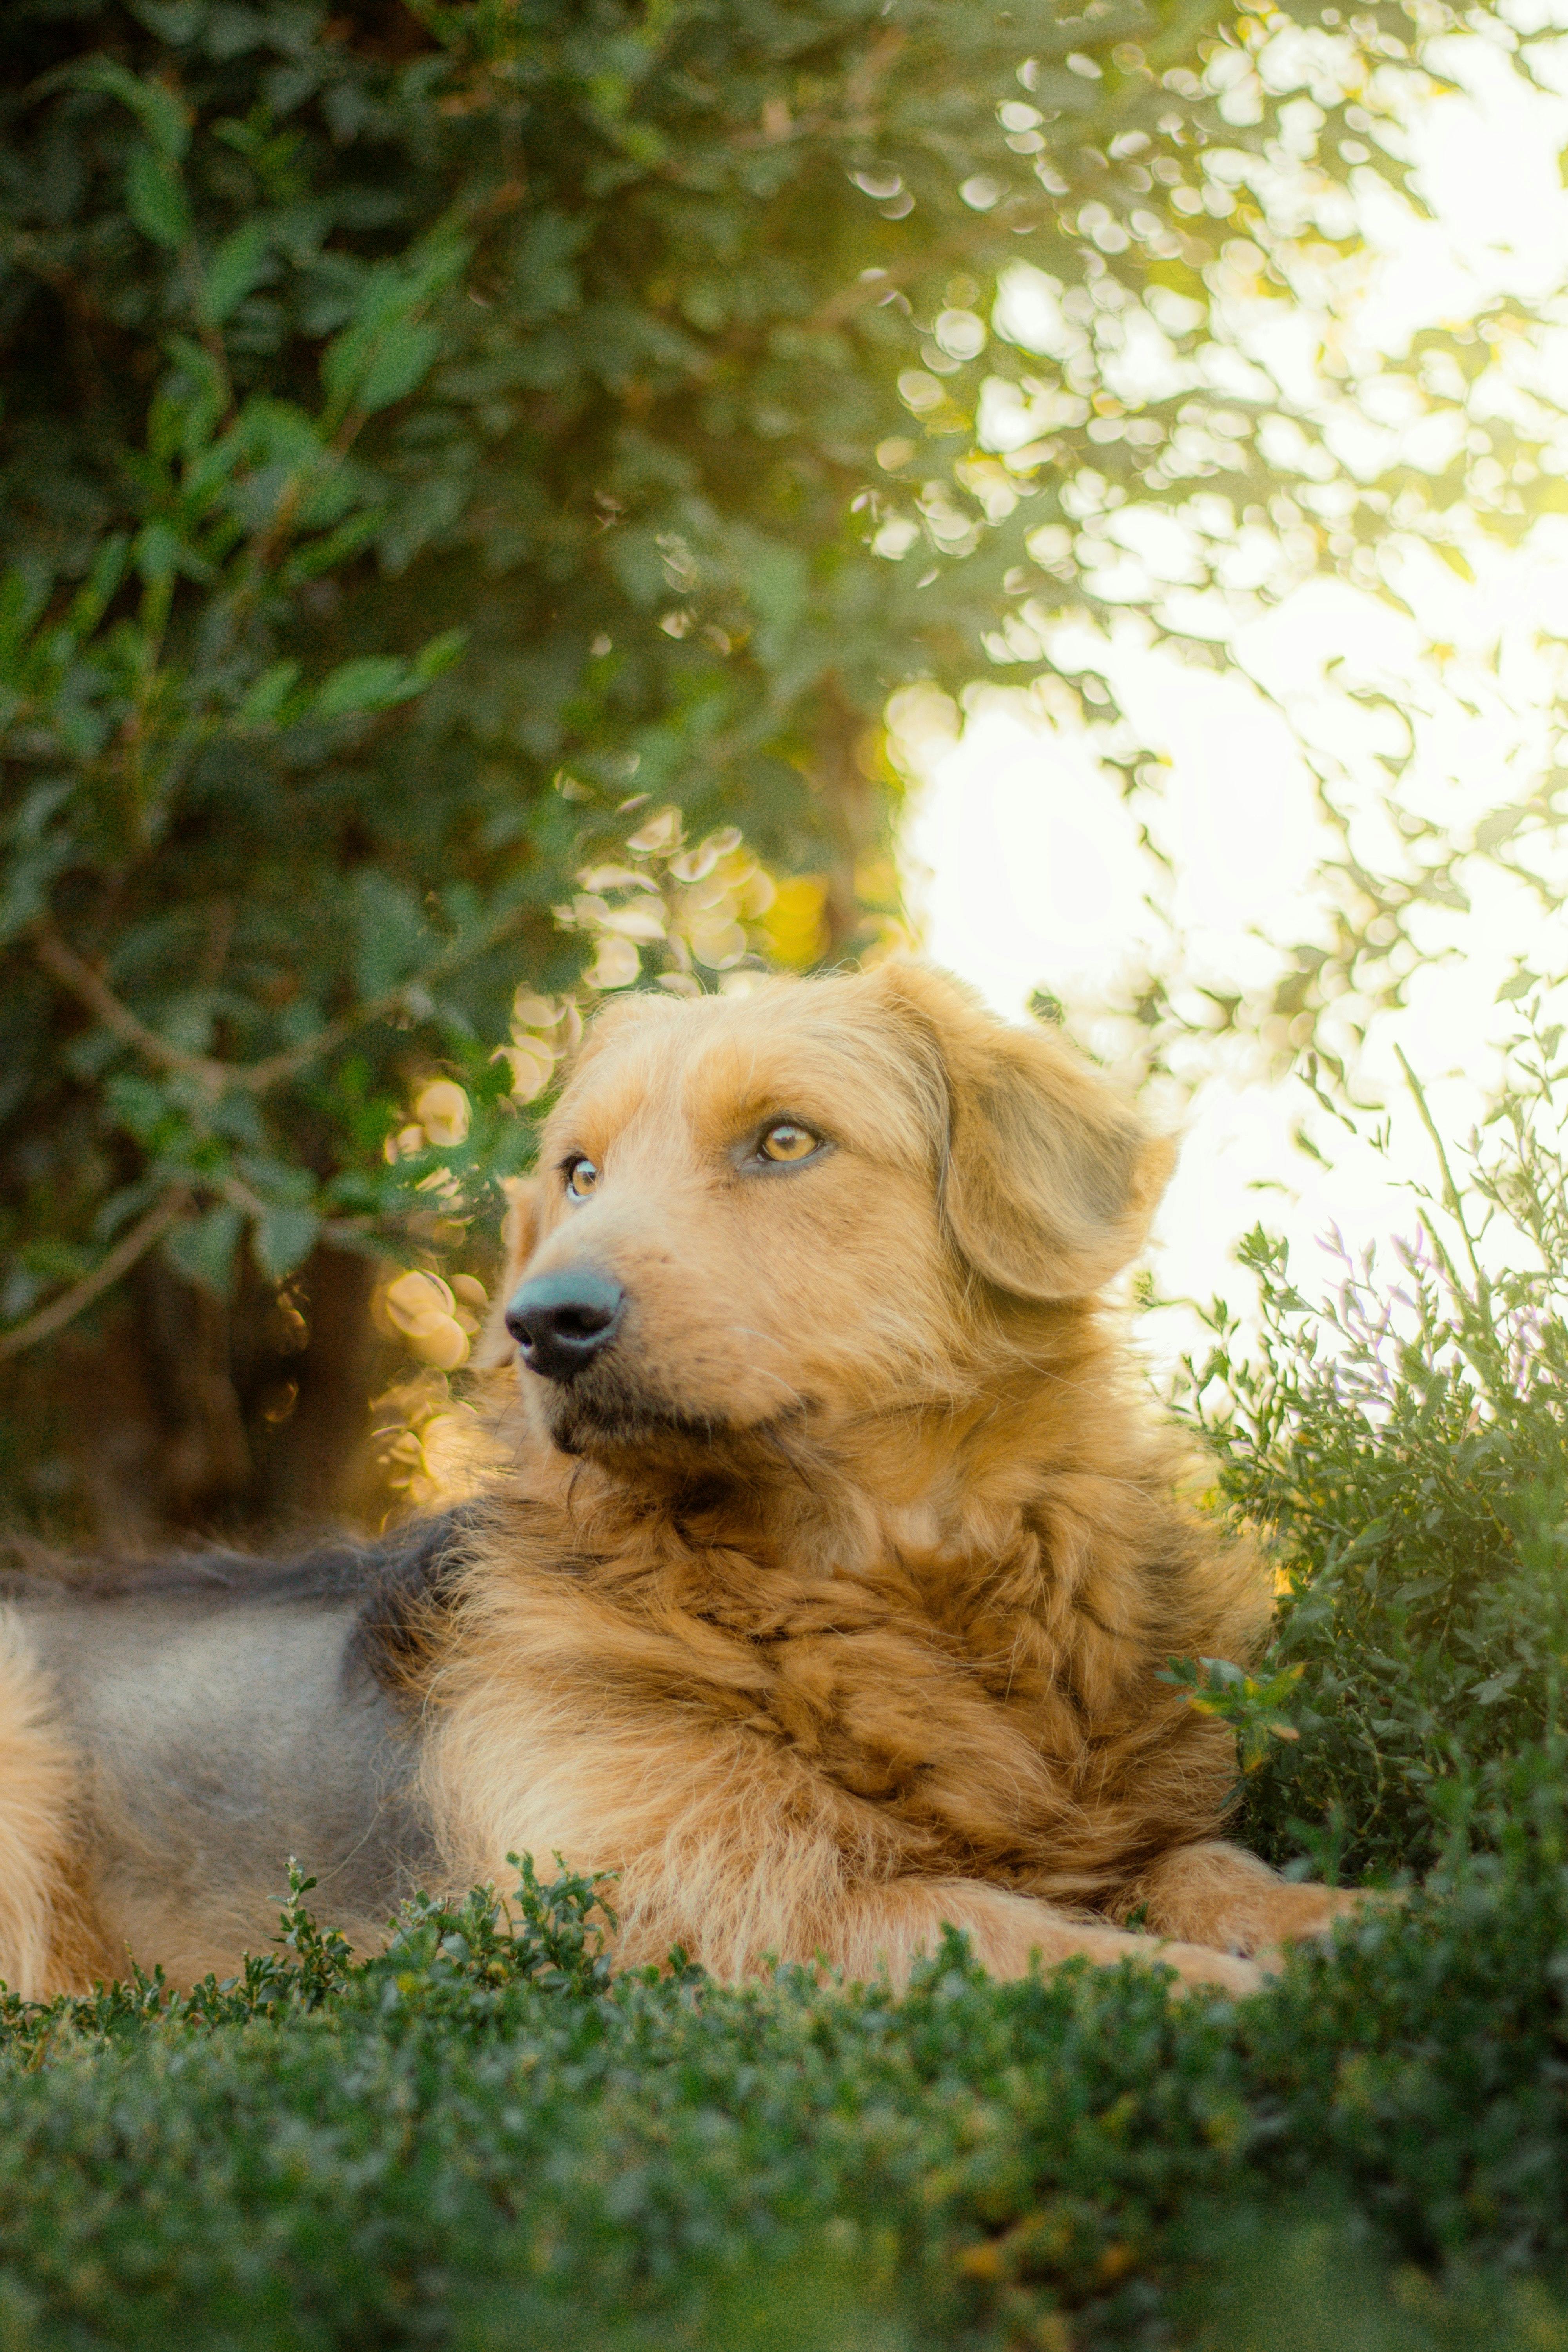 Golden Retriever lying on the grass, staring at something off-camera